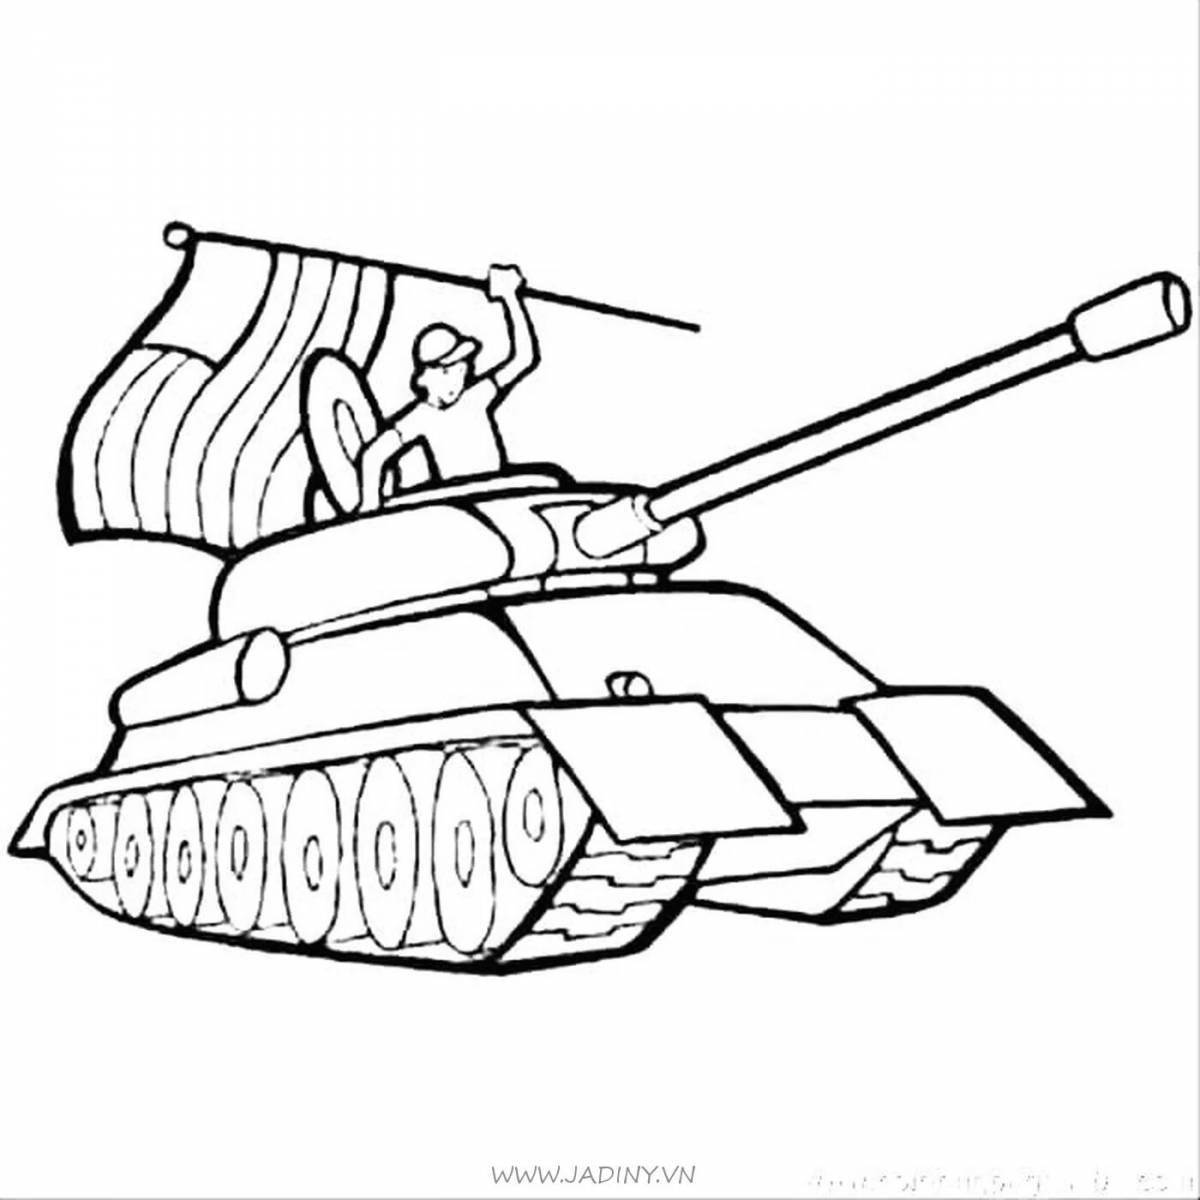 Coloring book adorable military lungs